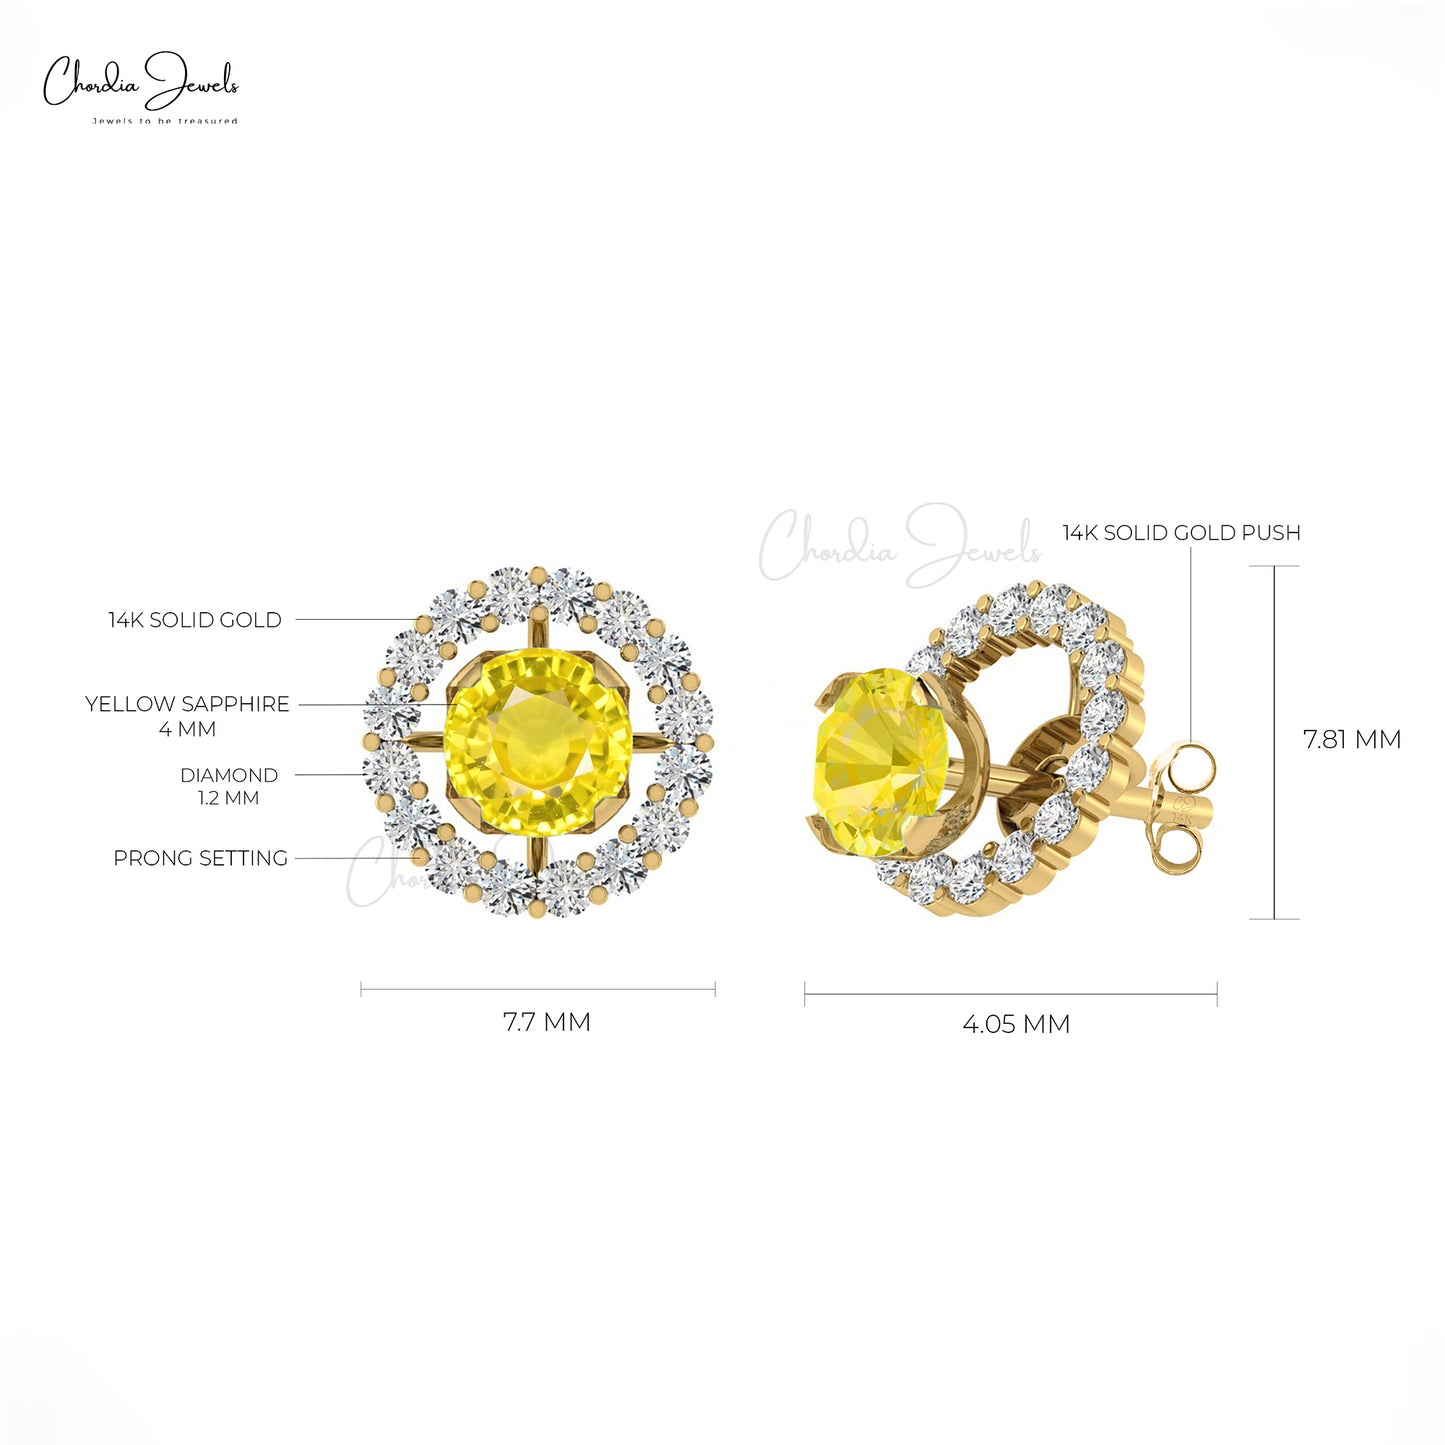 Natural Yellow Sapphire Halo Earrings 0.46Ct Round Gemstone Detachable Earrings 14k Real Gold Diamond Minimalist Jewelry For Bridal